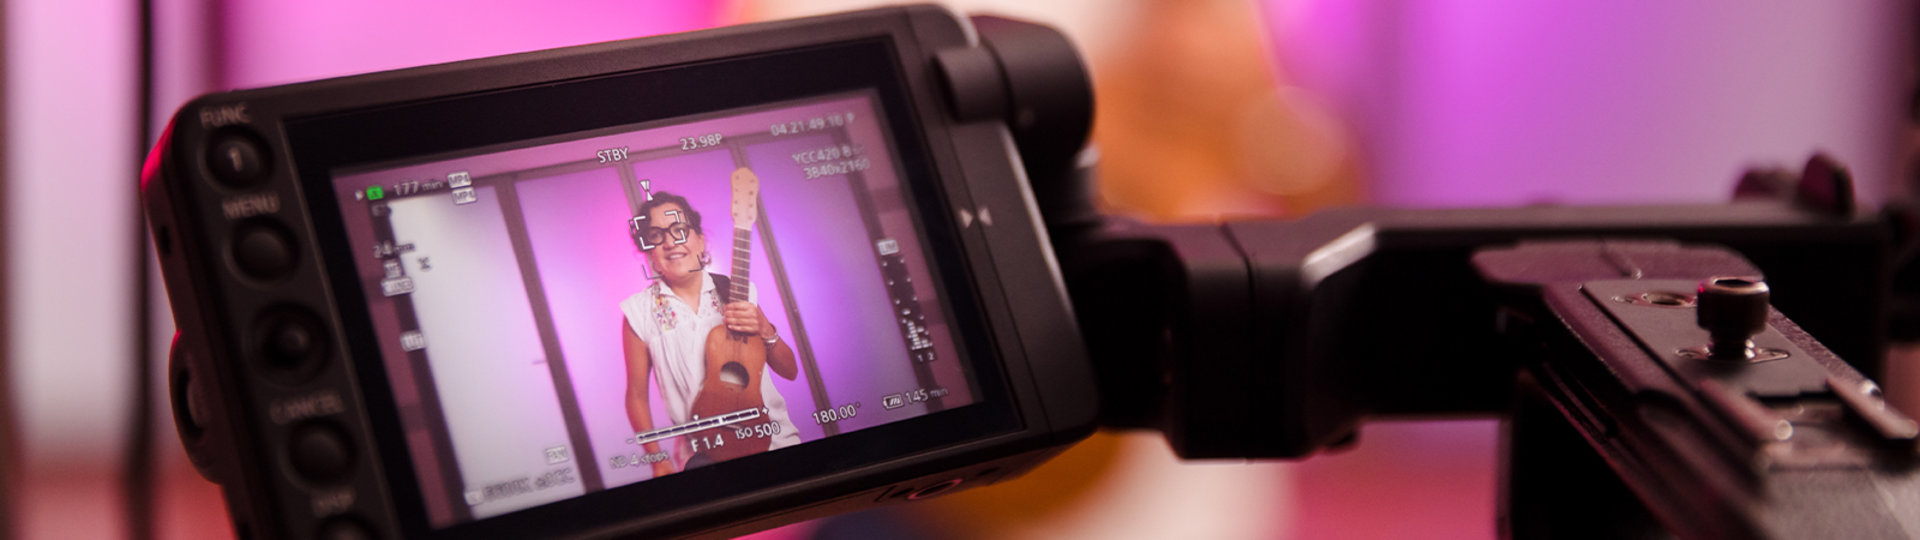 Photo of a camera viewfinder and video set up. In the viewfinder a woman can be seen holding a guitar and speaking.